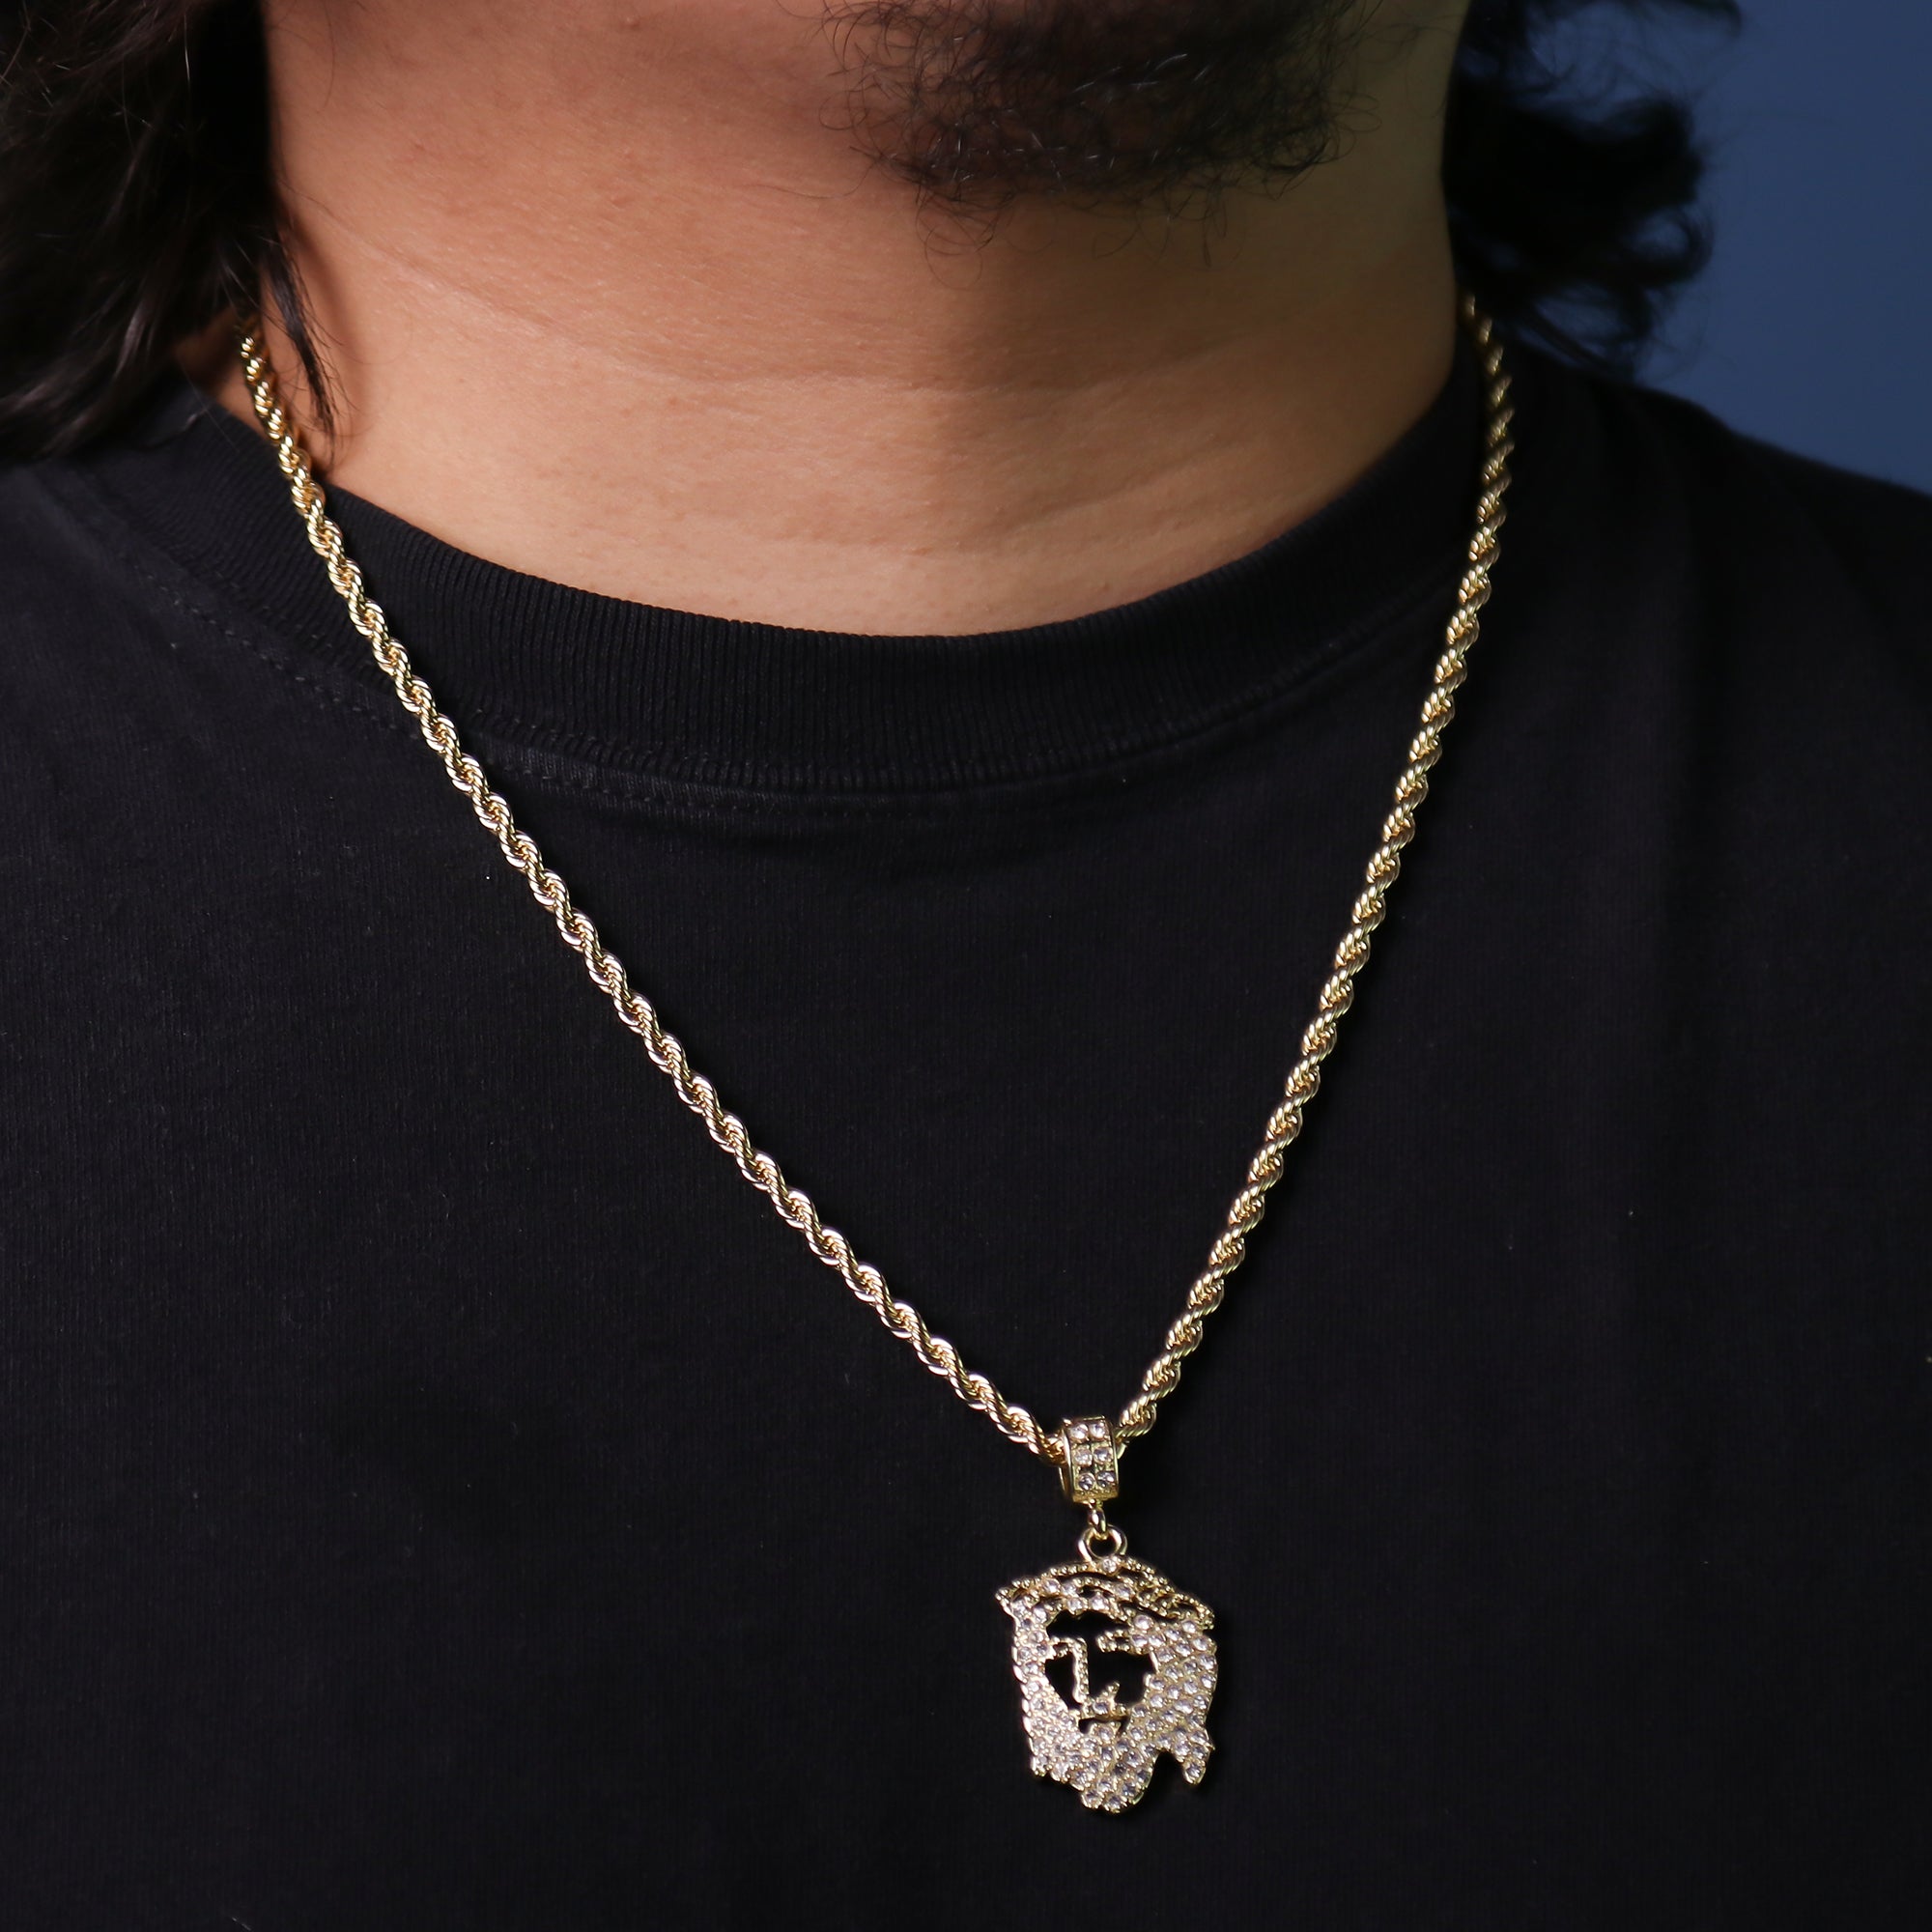 Fully Cz Hollow Jesus Face Pendant 24 Rope Chain Hip Hop 18k Jewelry Necklace JT